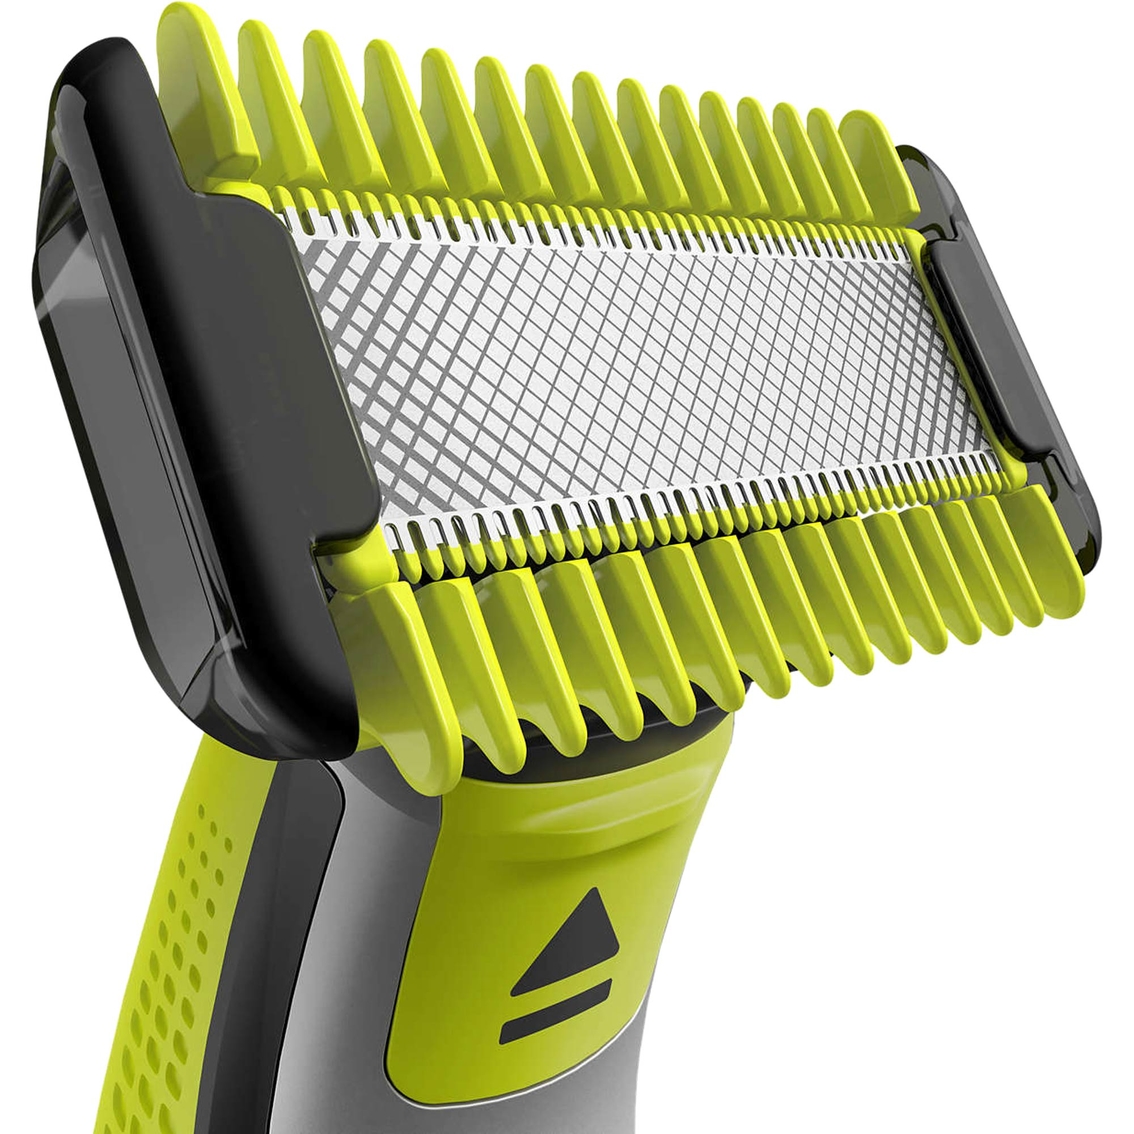 Philips Norelco OneBlade Hybrid Electric Trimmer